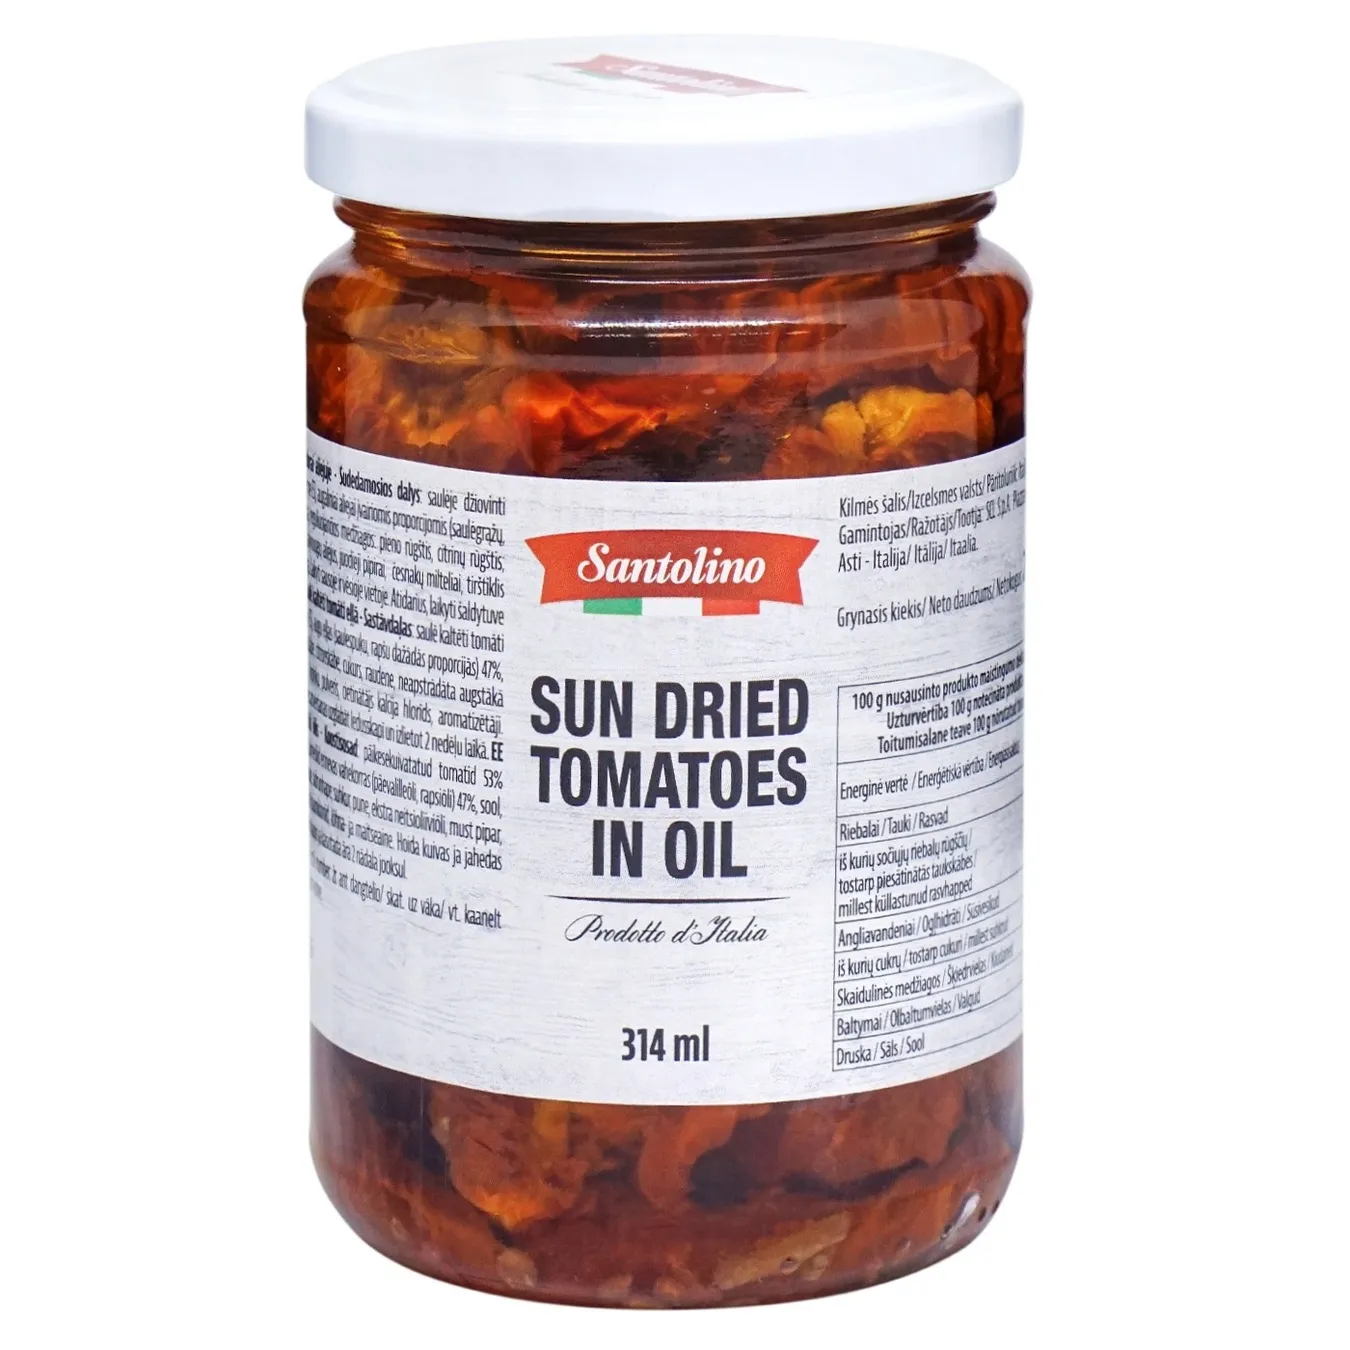 Sun-dried tomatoes Santolino canned in oil 290g